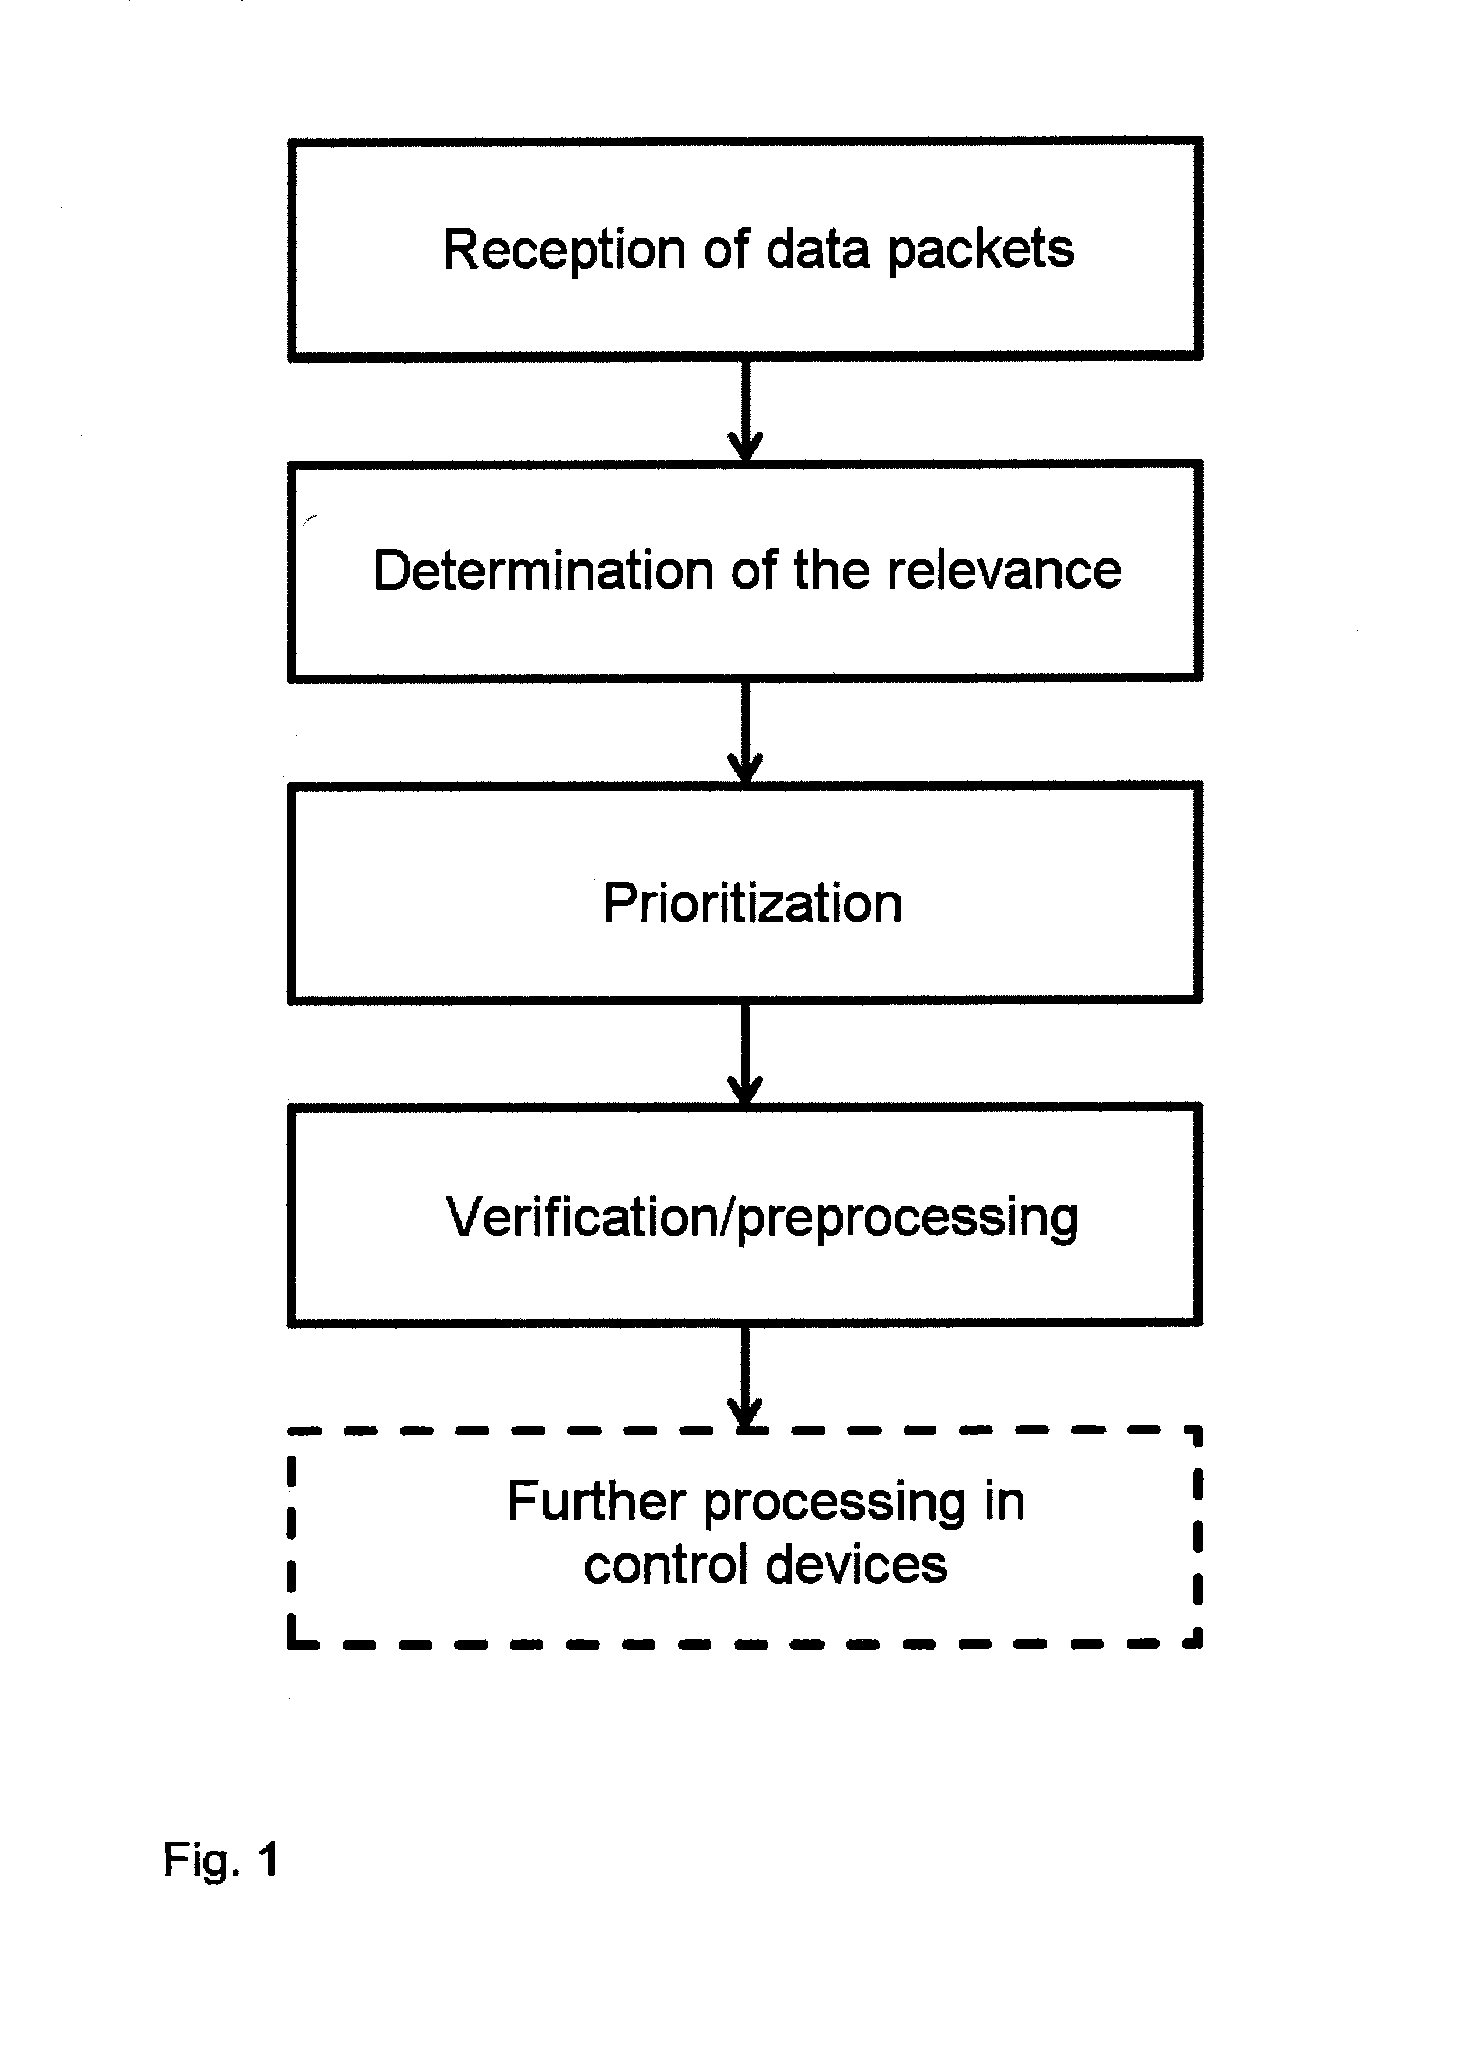 Method for verifying and/or preprocessing data packets and control device set up to carry out the method